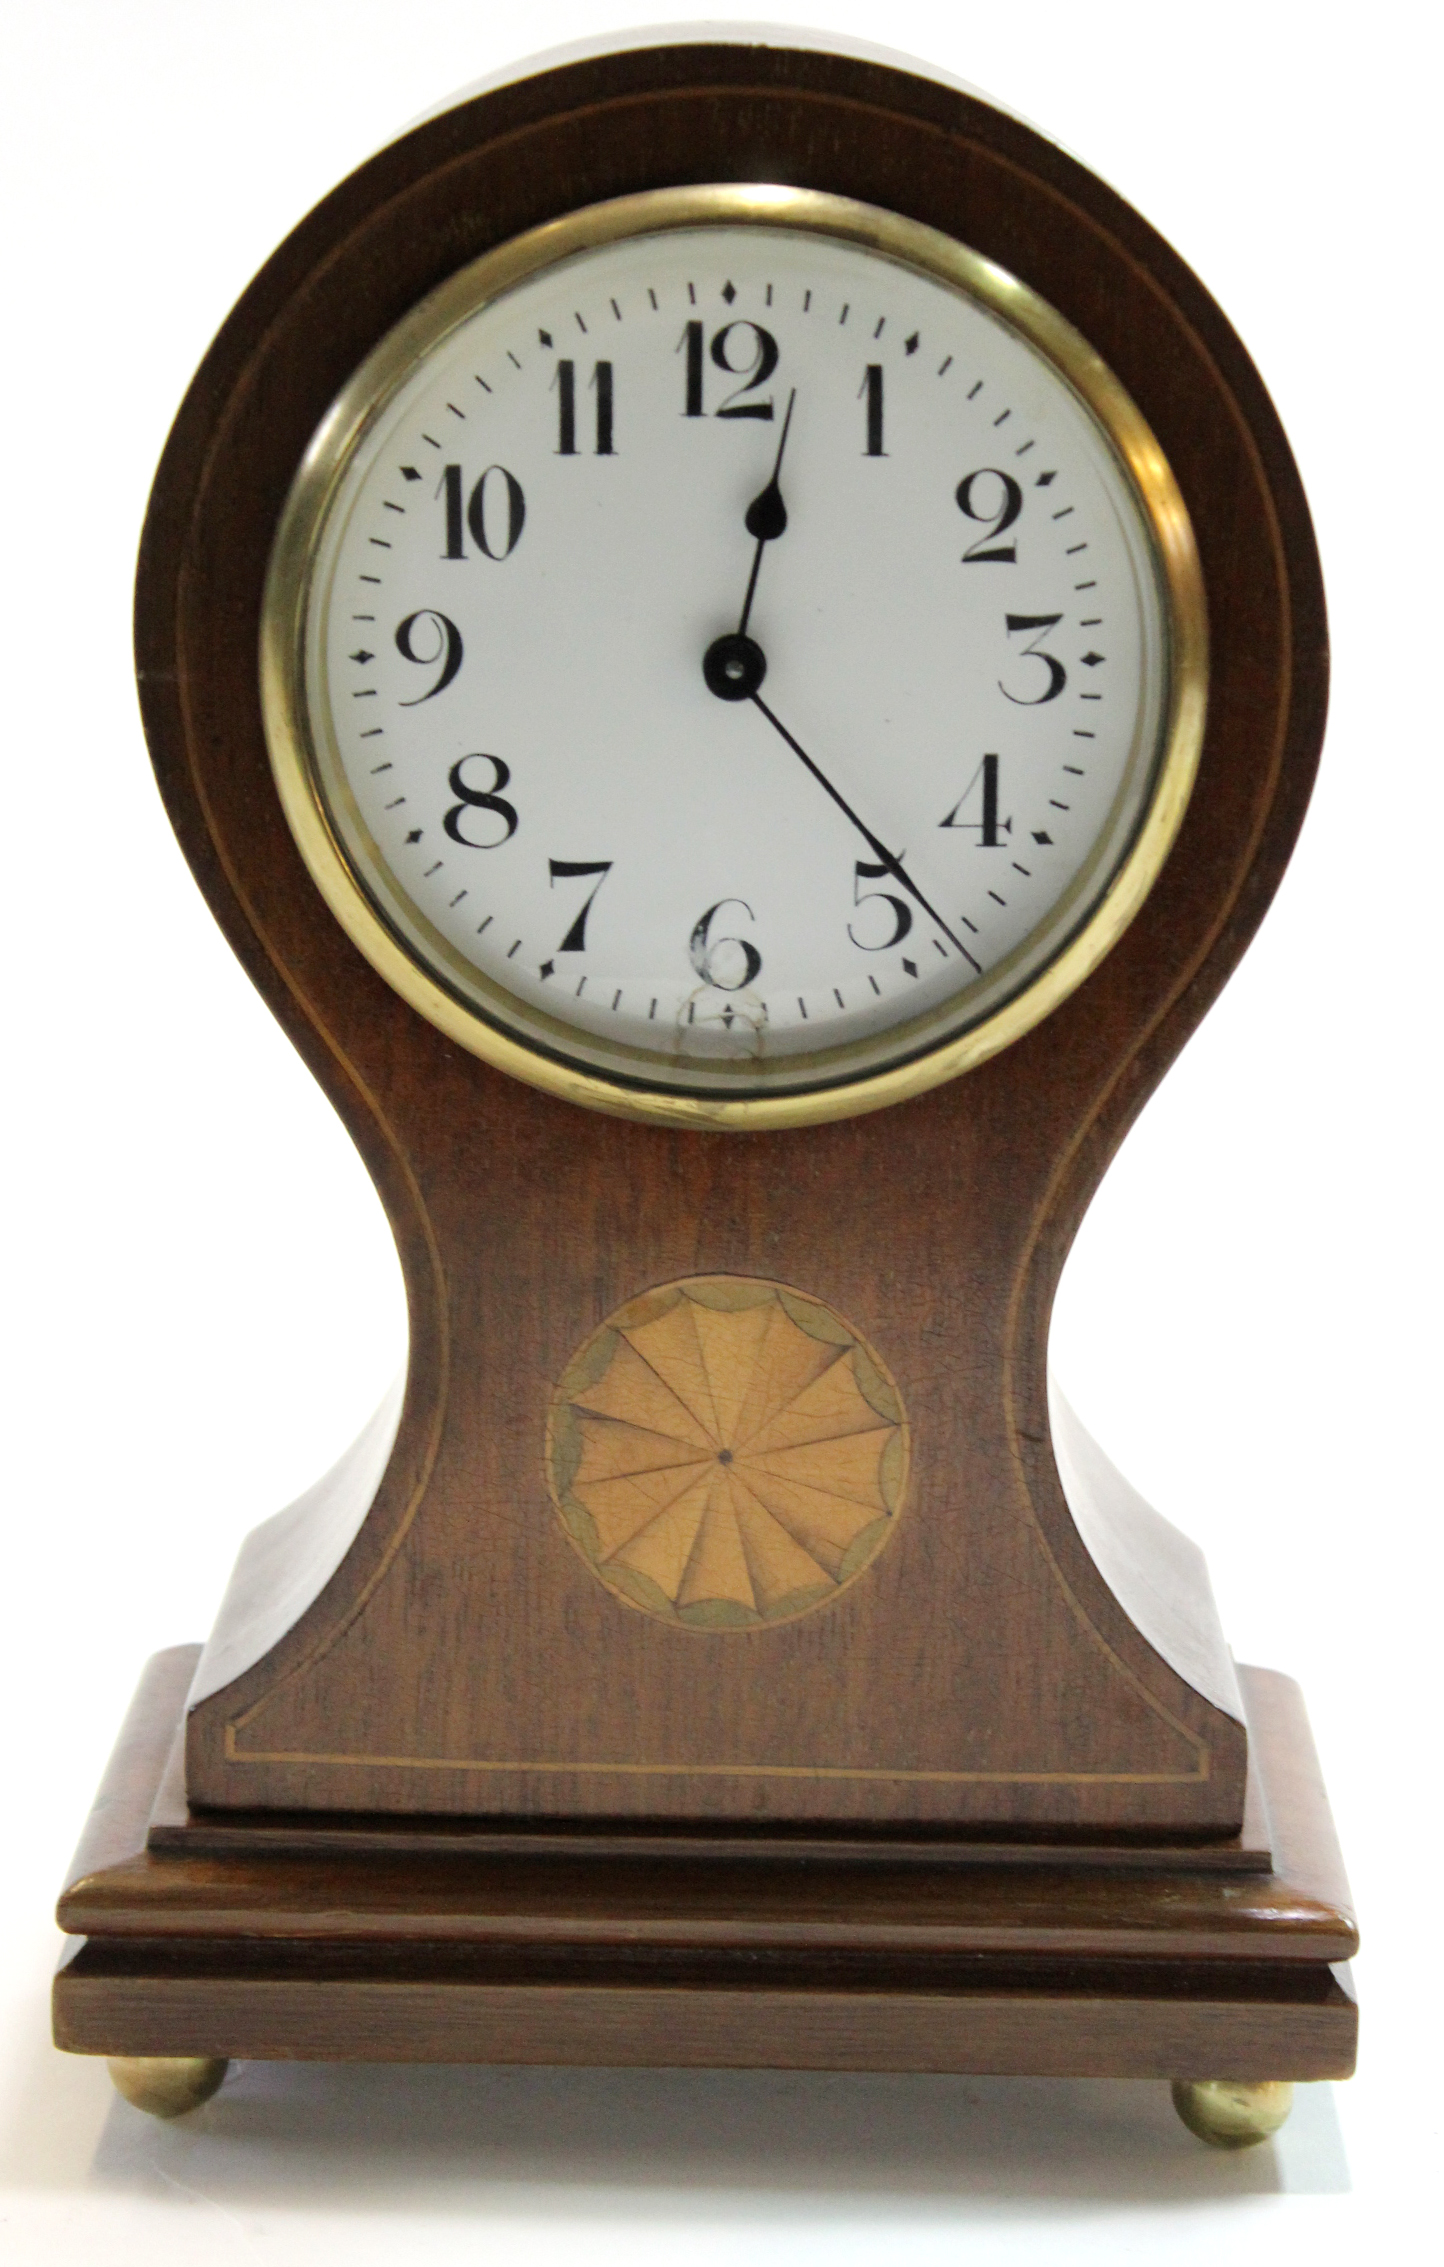 Edwardian bracket clock by S Money of Lowestoft, the clock in lancet style case with brass handles - Image 4 of 4